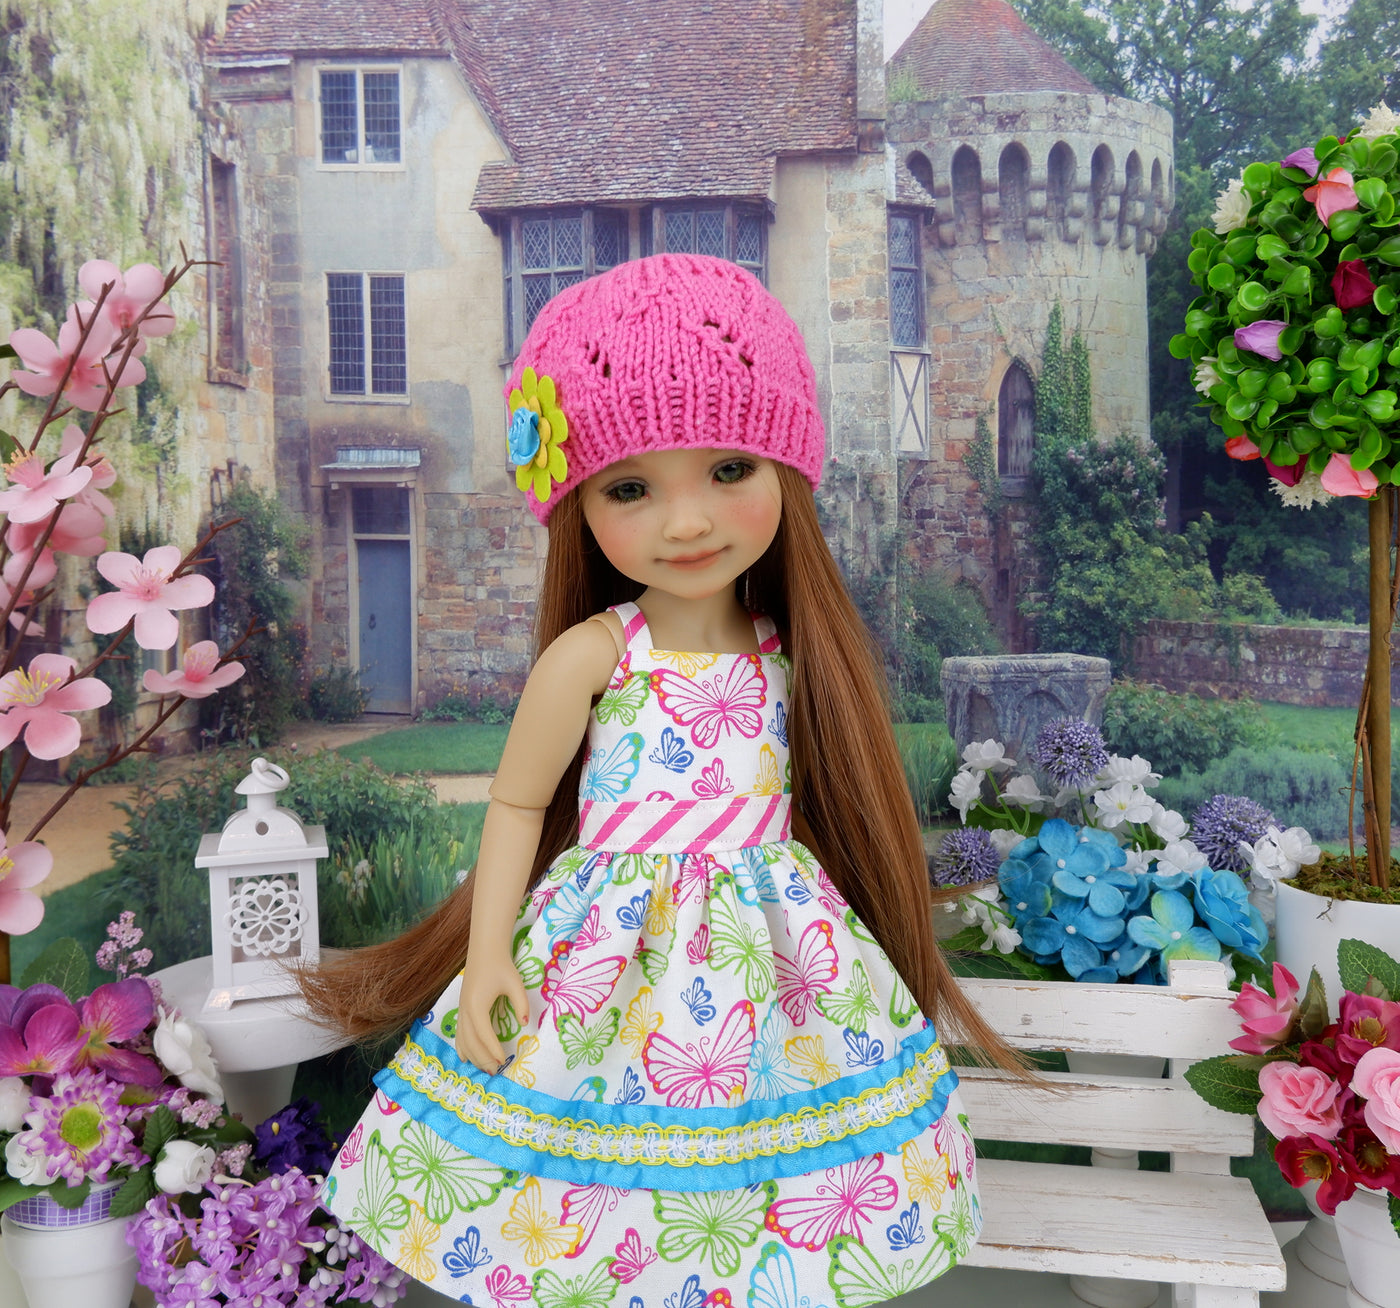 Bright Butterflies - dress and sweater set with shoes for Ruby Red Fashion Friends doll